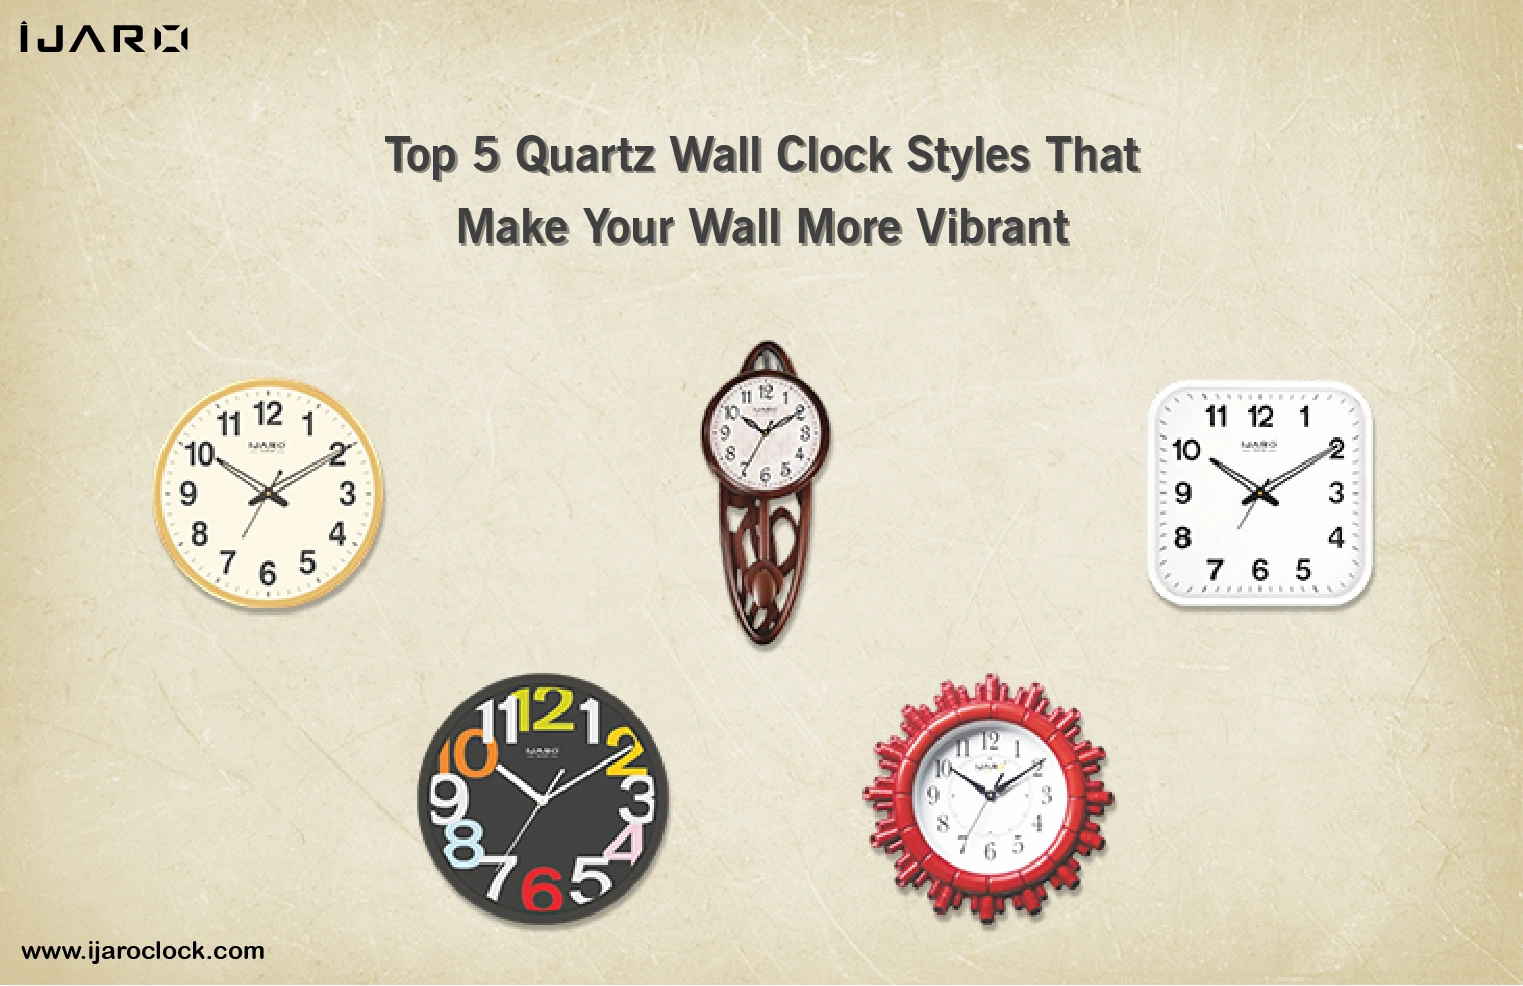 Top 5 Quartz Wall Clock Styles That Make Your Wall More Vibrant